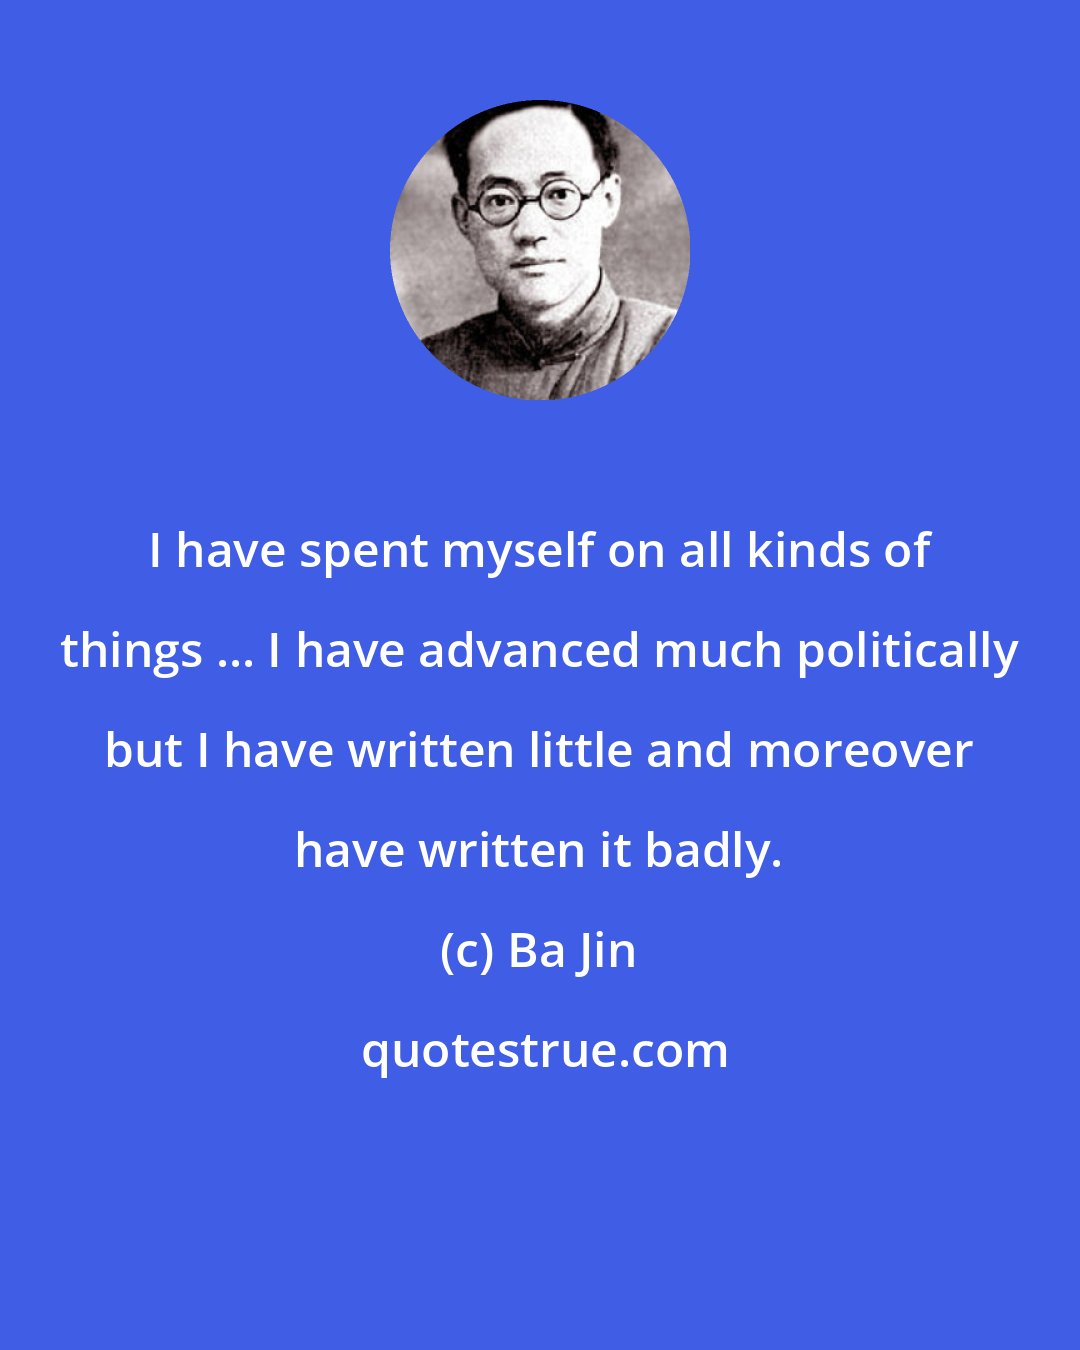 Ba Jin: I have spent myself on all kinds of things ... I have advanced much politically but I have written little and moreover have written it badly.